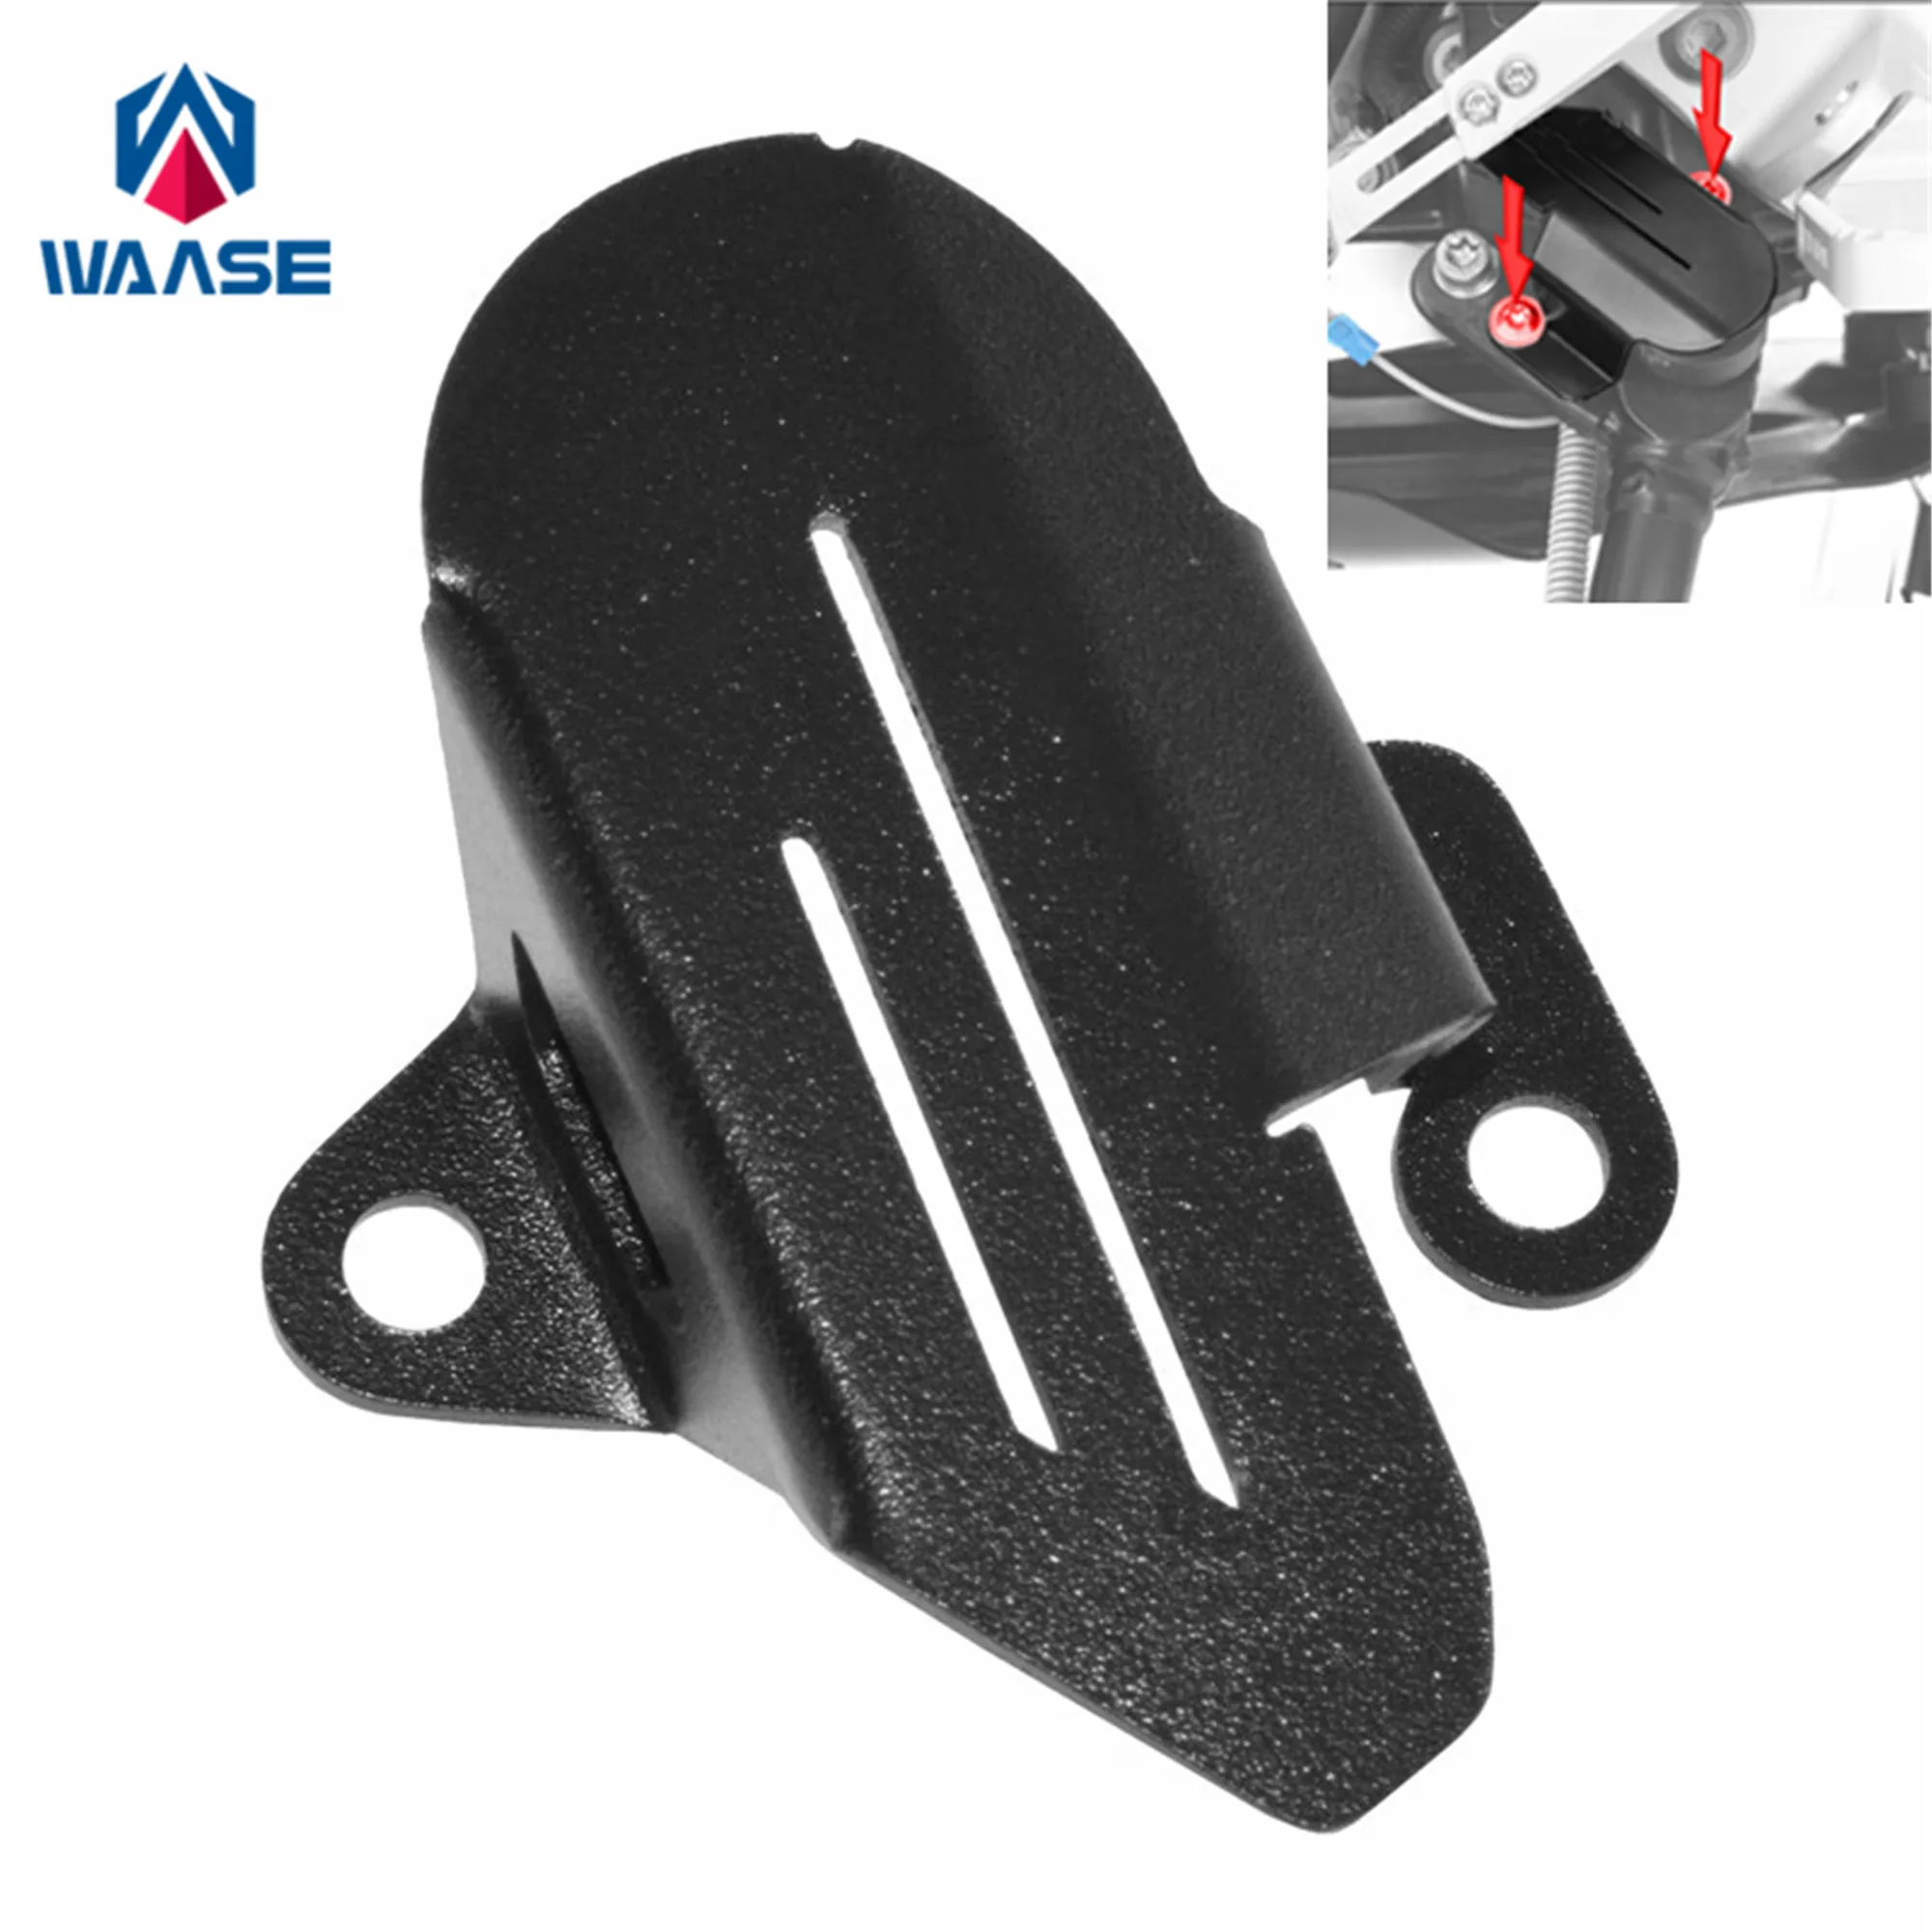 waase For BMW F750GS F850GS F 750 F850 GS 2018 2019 2020 2021 Kickstand Guard Cover Side Stand Top Switch protection